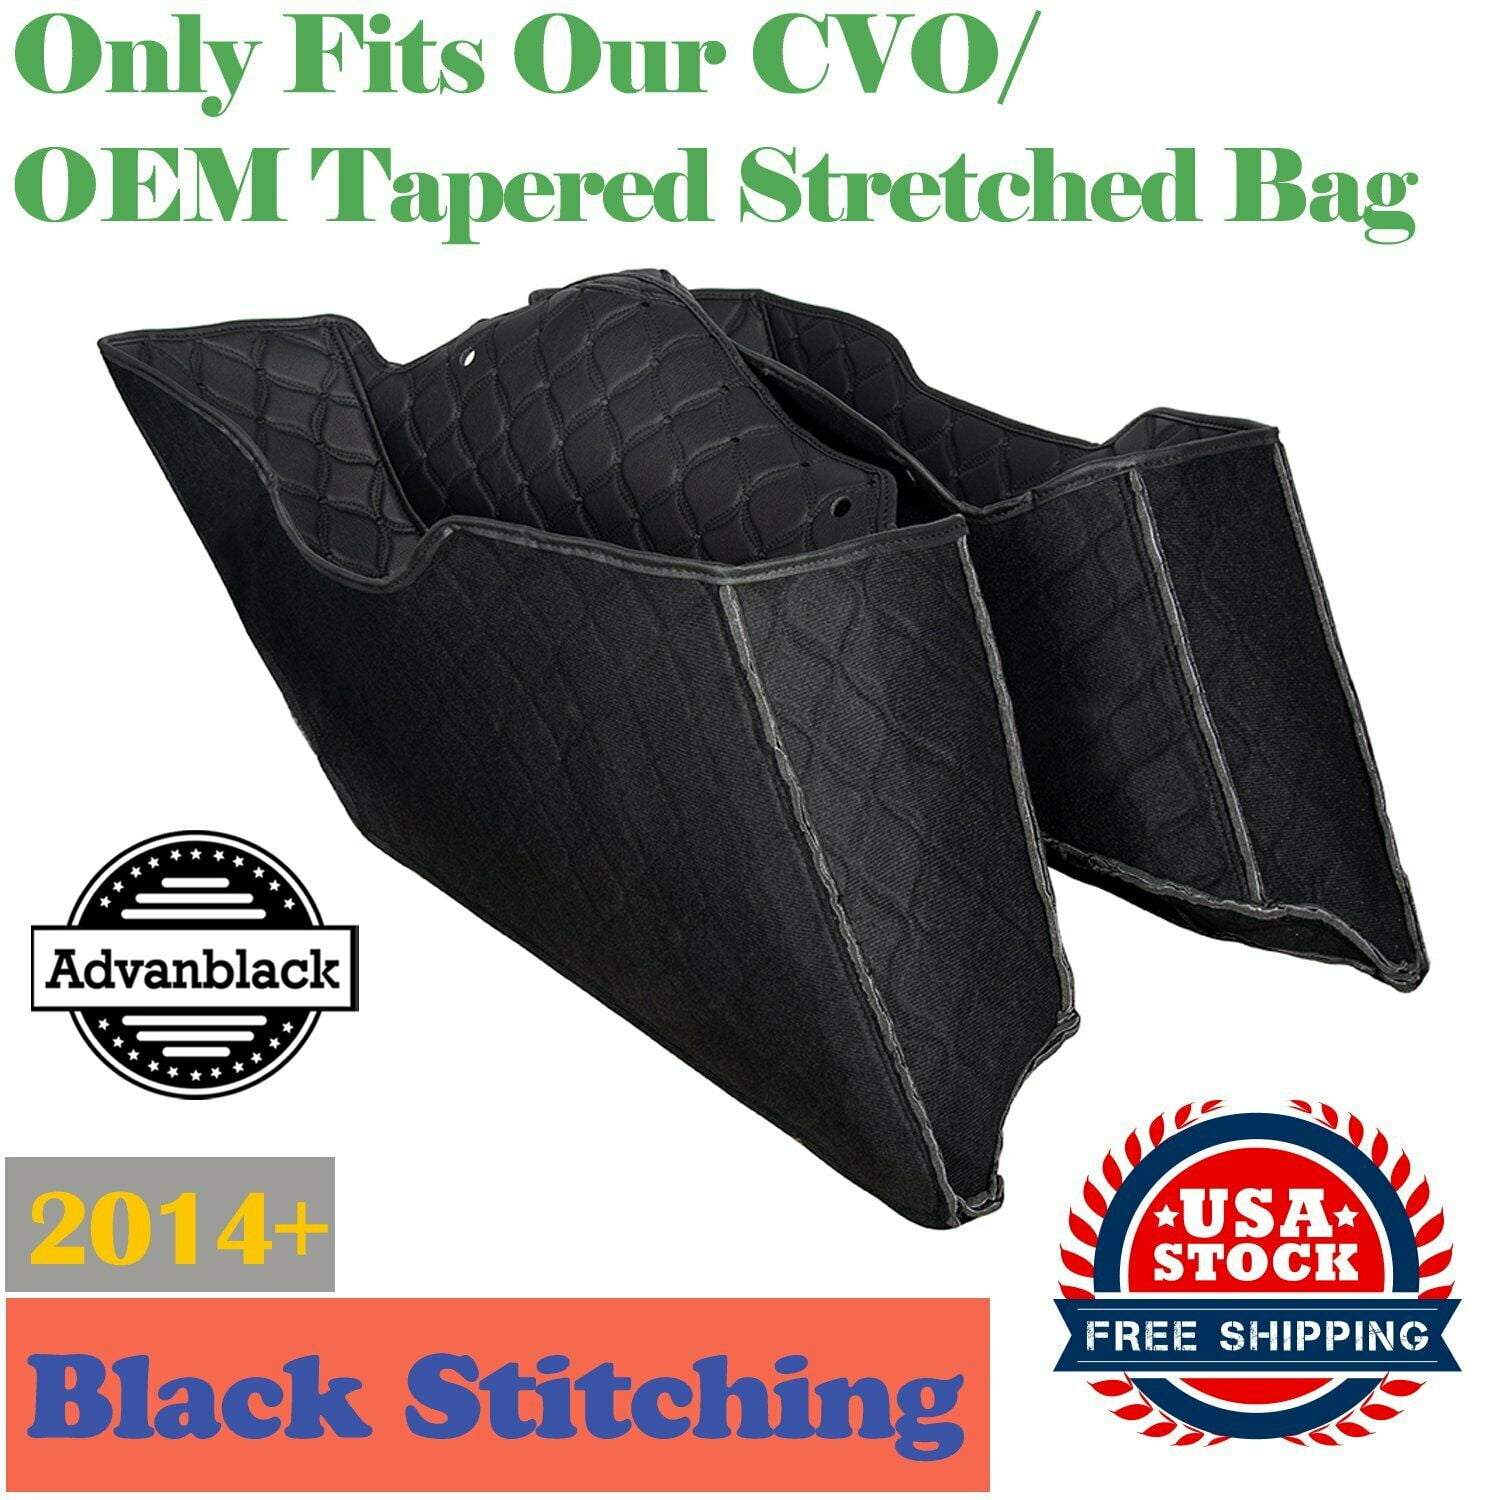 CVO Hard Saddlebags 2018 2019 Stock Stretched Bags Us Stock Advanblack Black Thread Extended Bags Inserts Stretched Saddlebags Liners Fit for 2014 